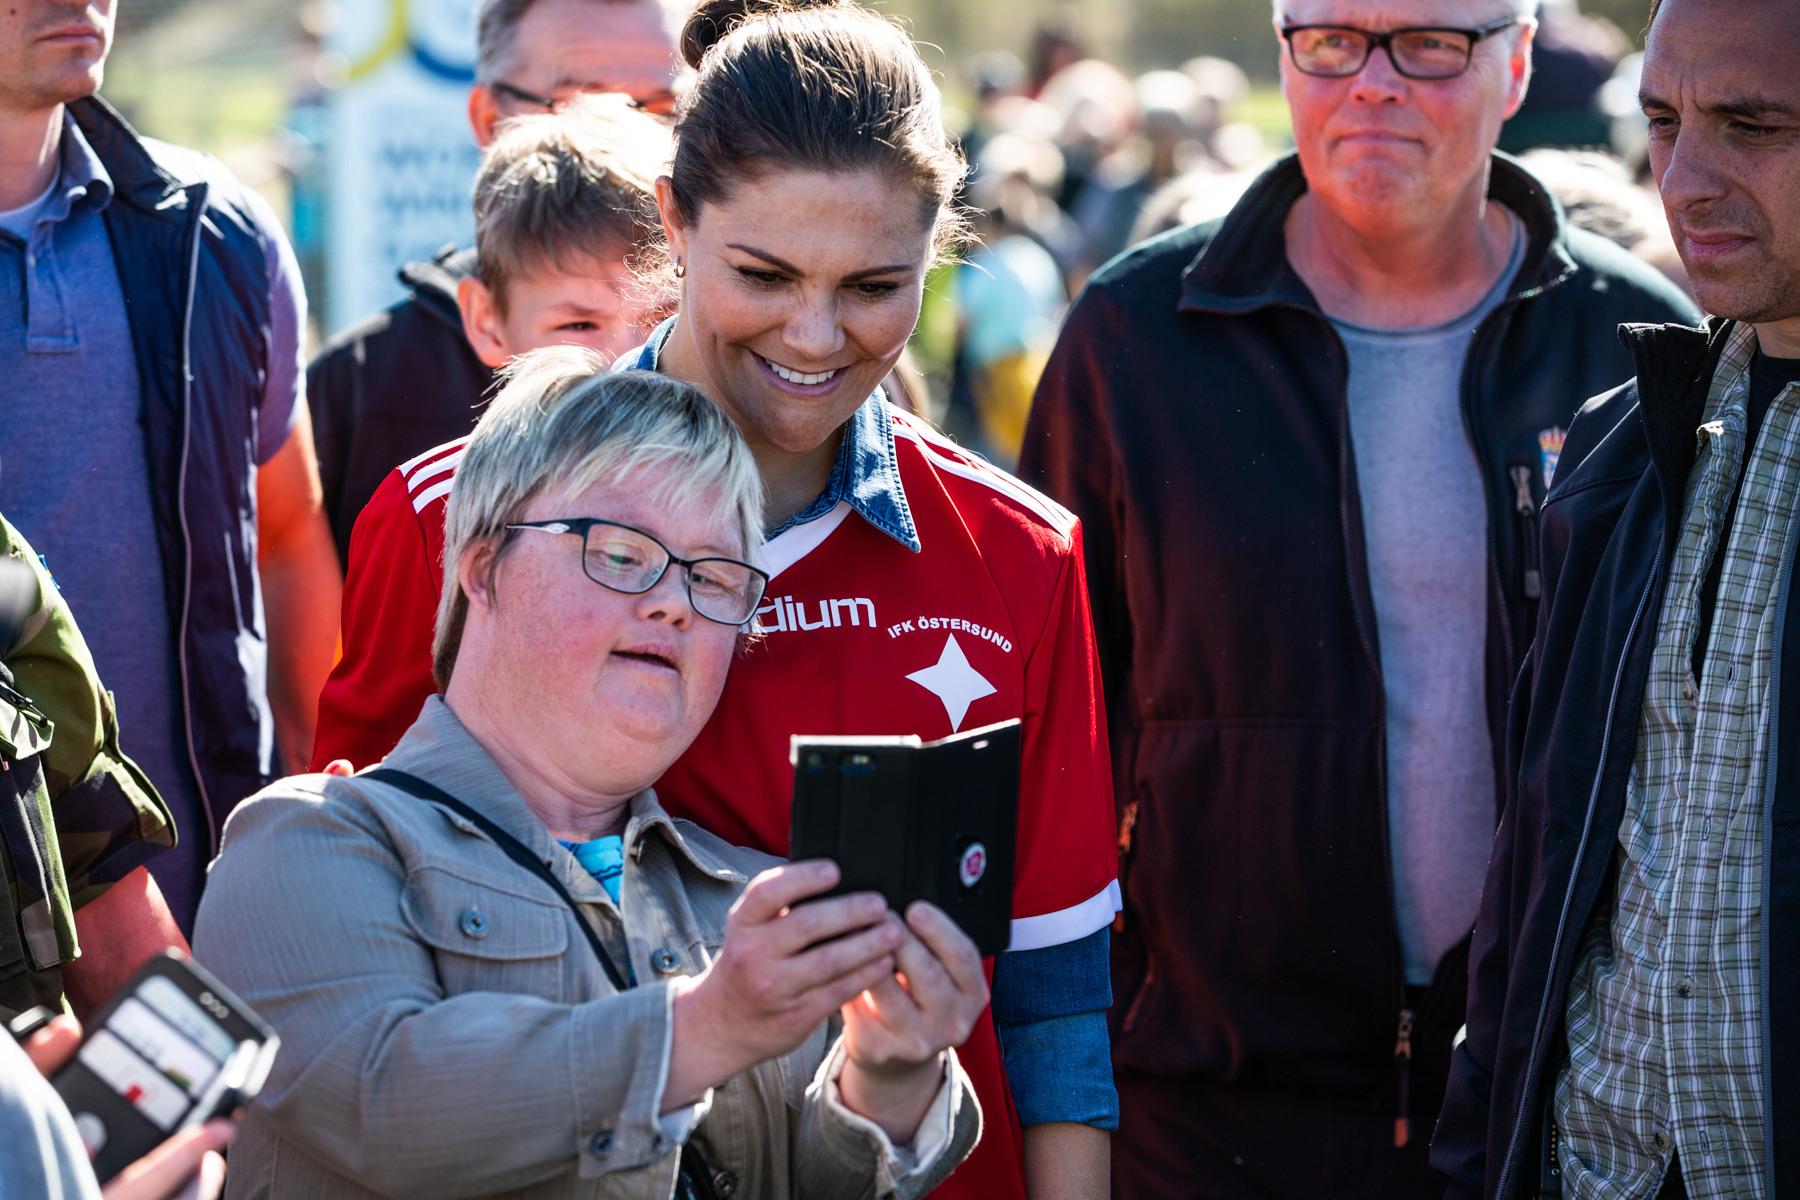 Crown Princess Victoria in a football T-shirt being shown something on a woman's mobile phone. Crown Princess Victoria is a popular member of the Swedish royal family.